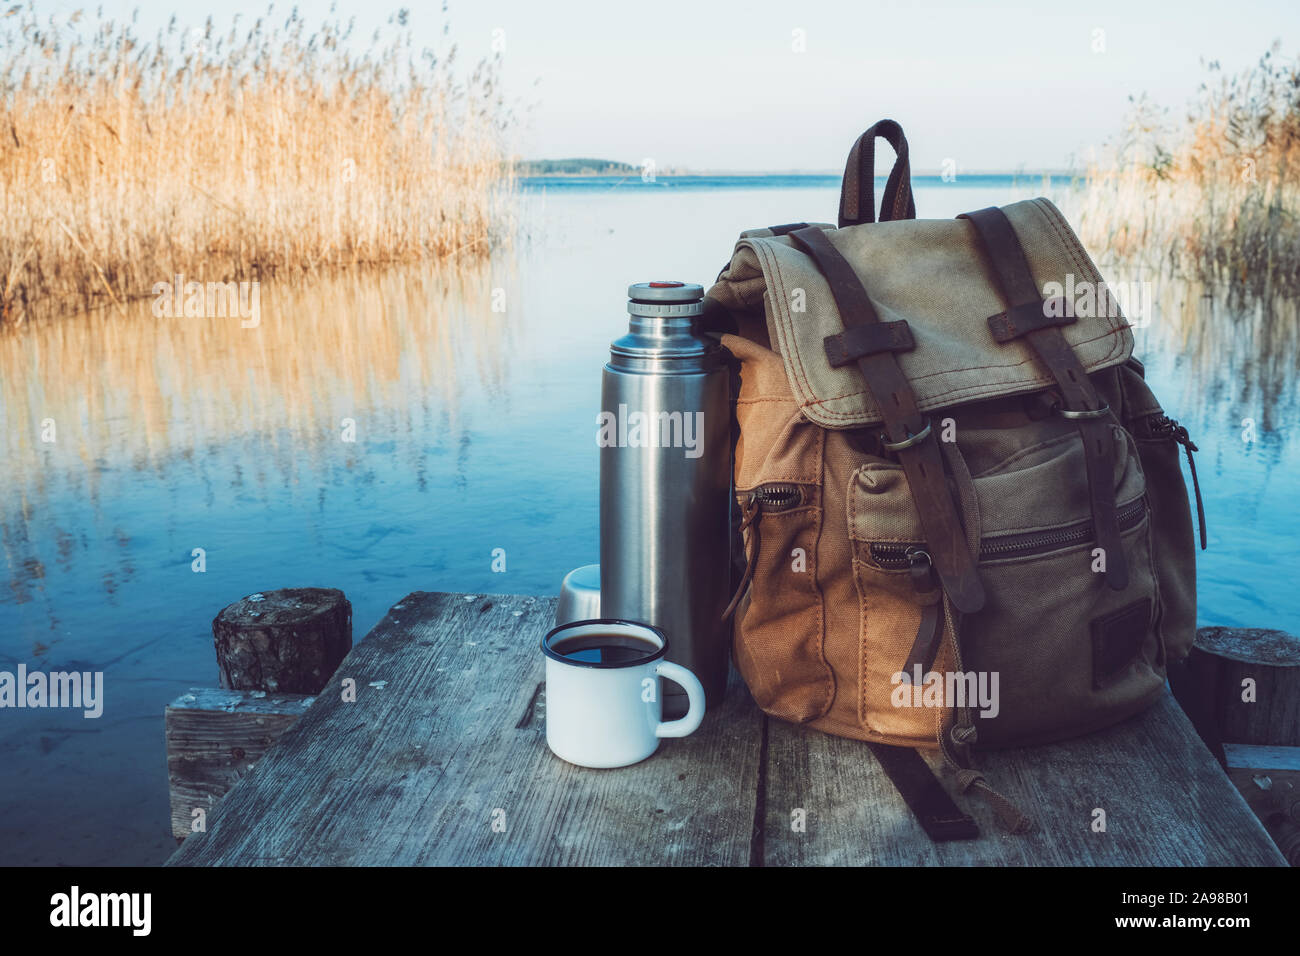 Enameled mug of coffee or tea, backpack of traveller and thermos on wooden pier on tranquil lake. Stock Photo